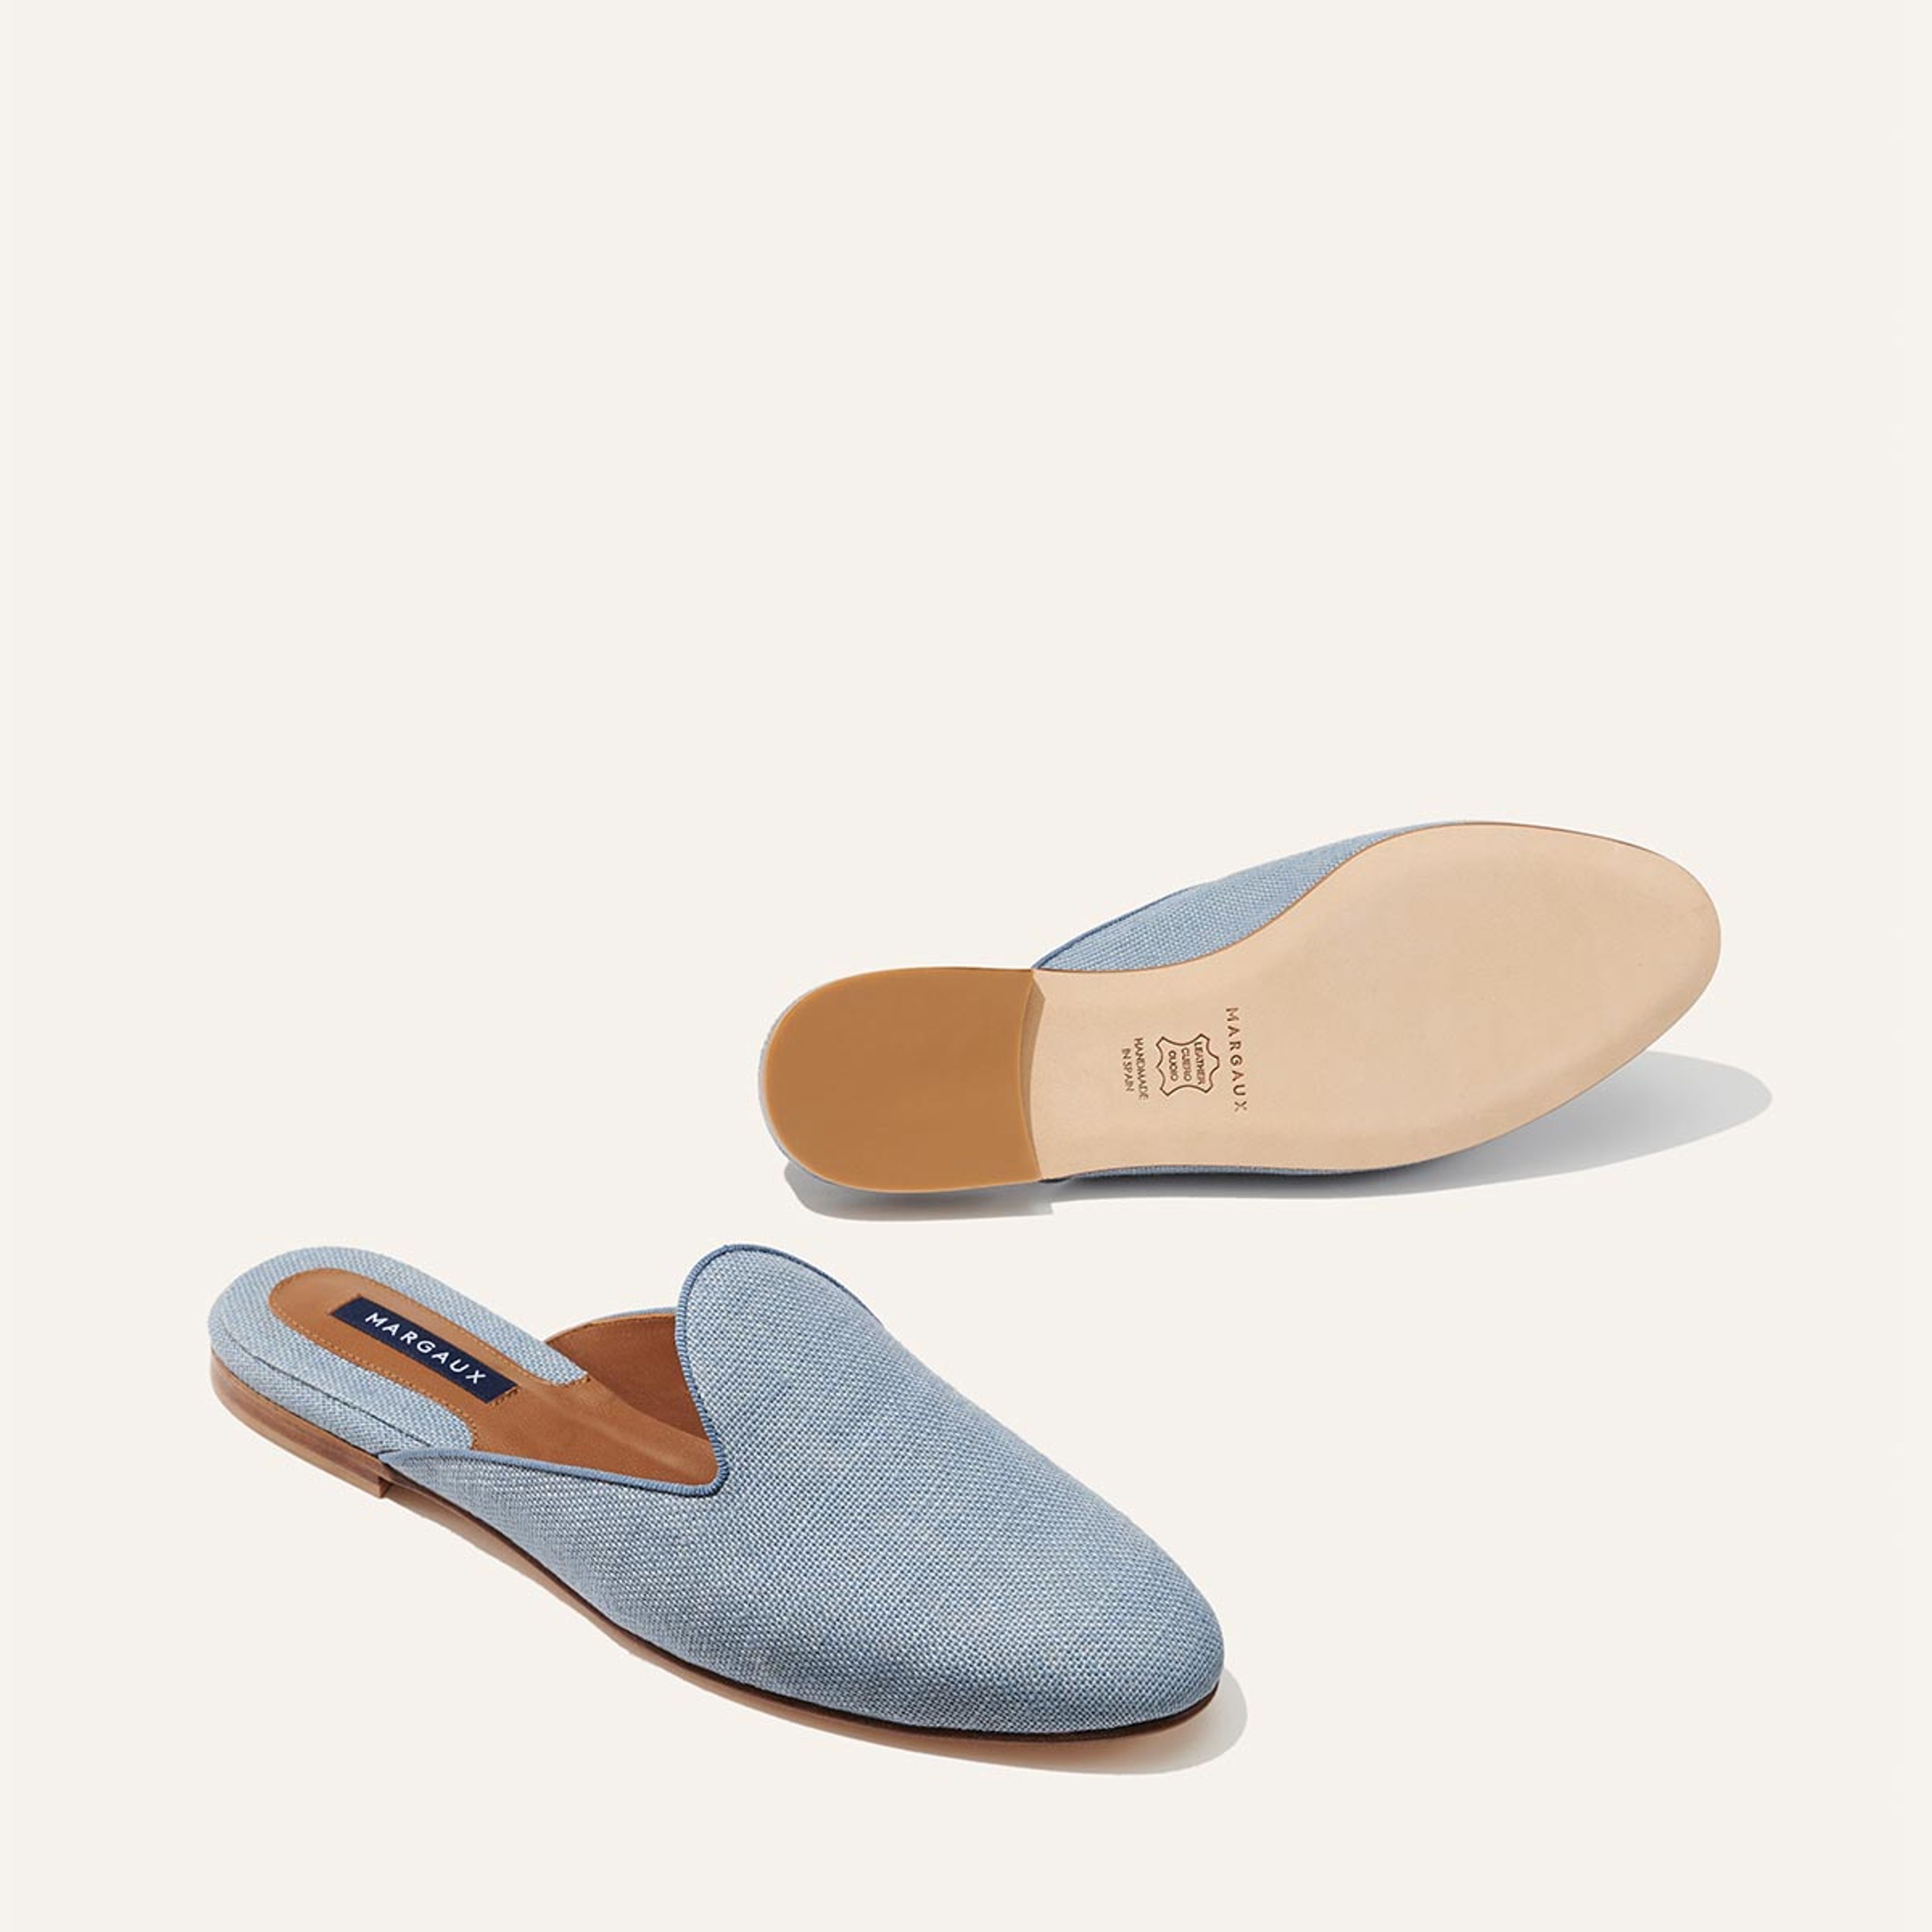 The Loafer Mule - Thistle Linen